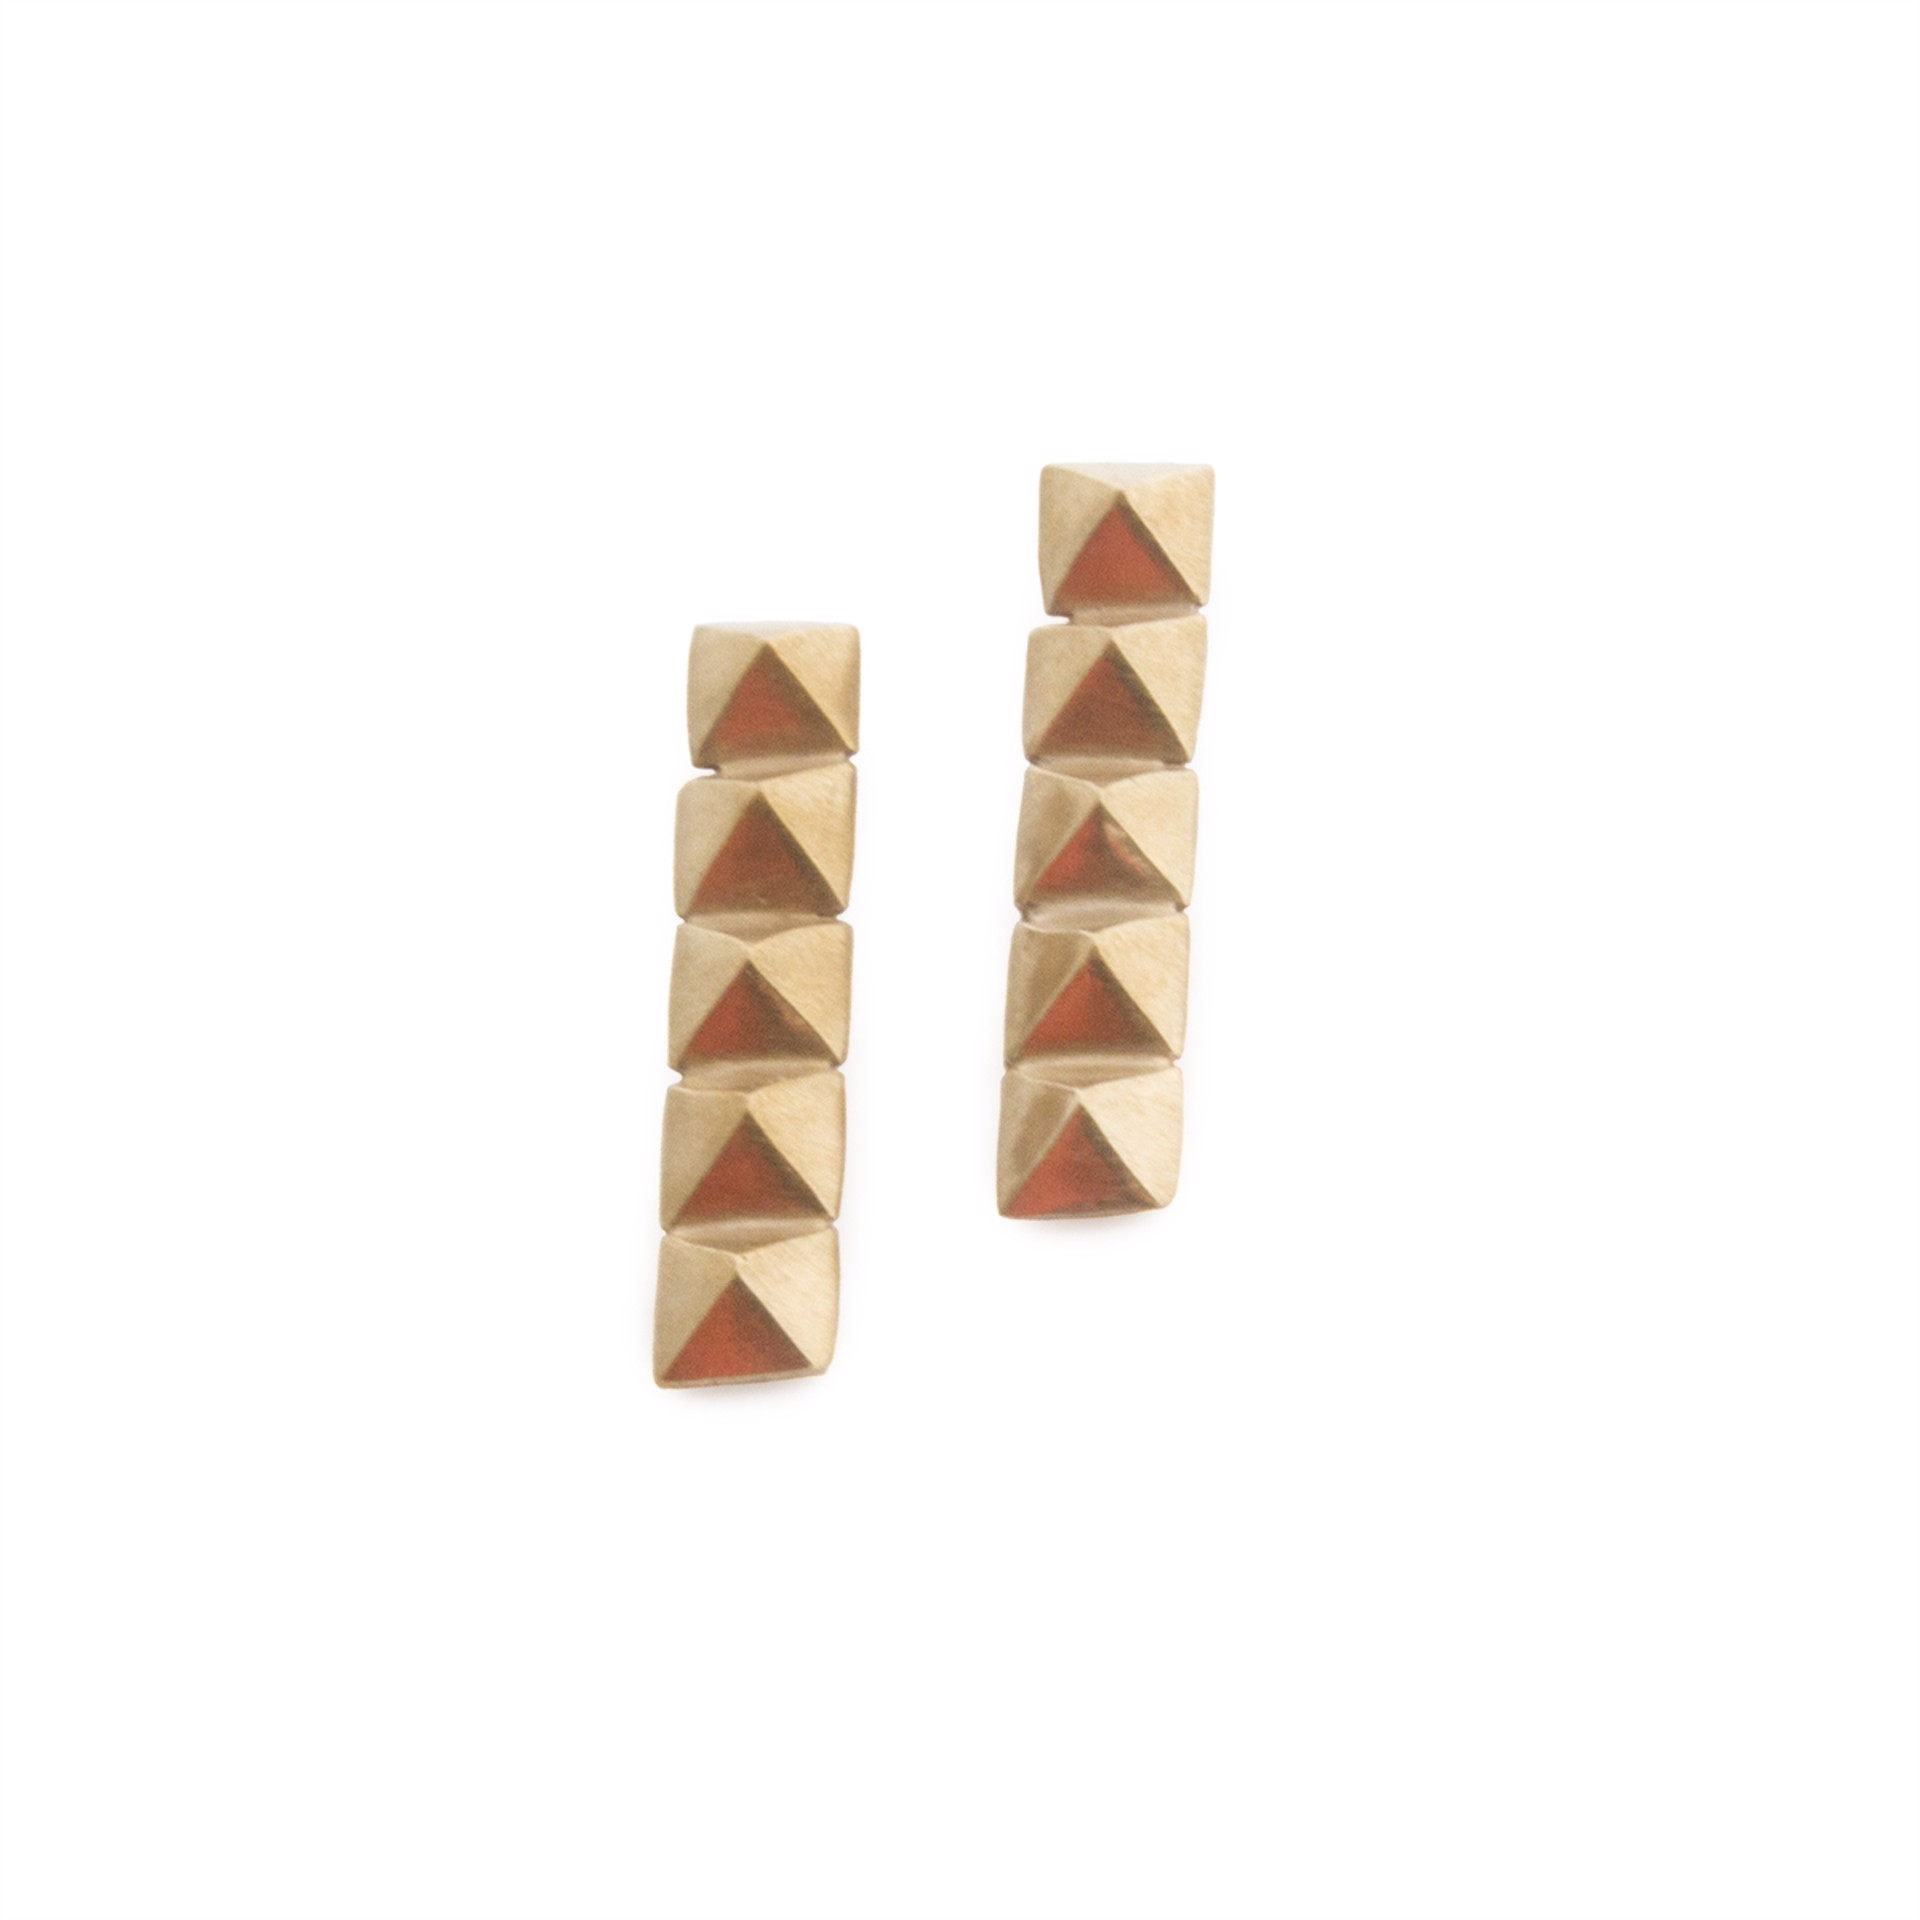 Pyramid Stacked Stud Earrings - Bronze by Audrey Laine